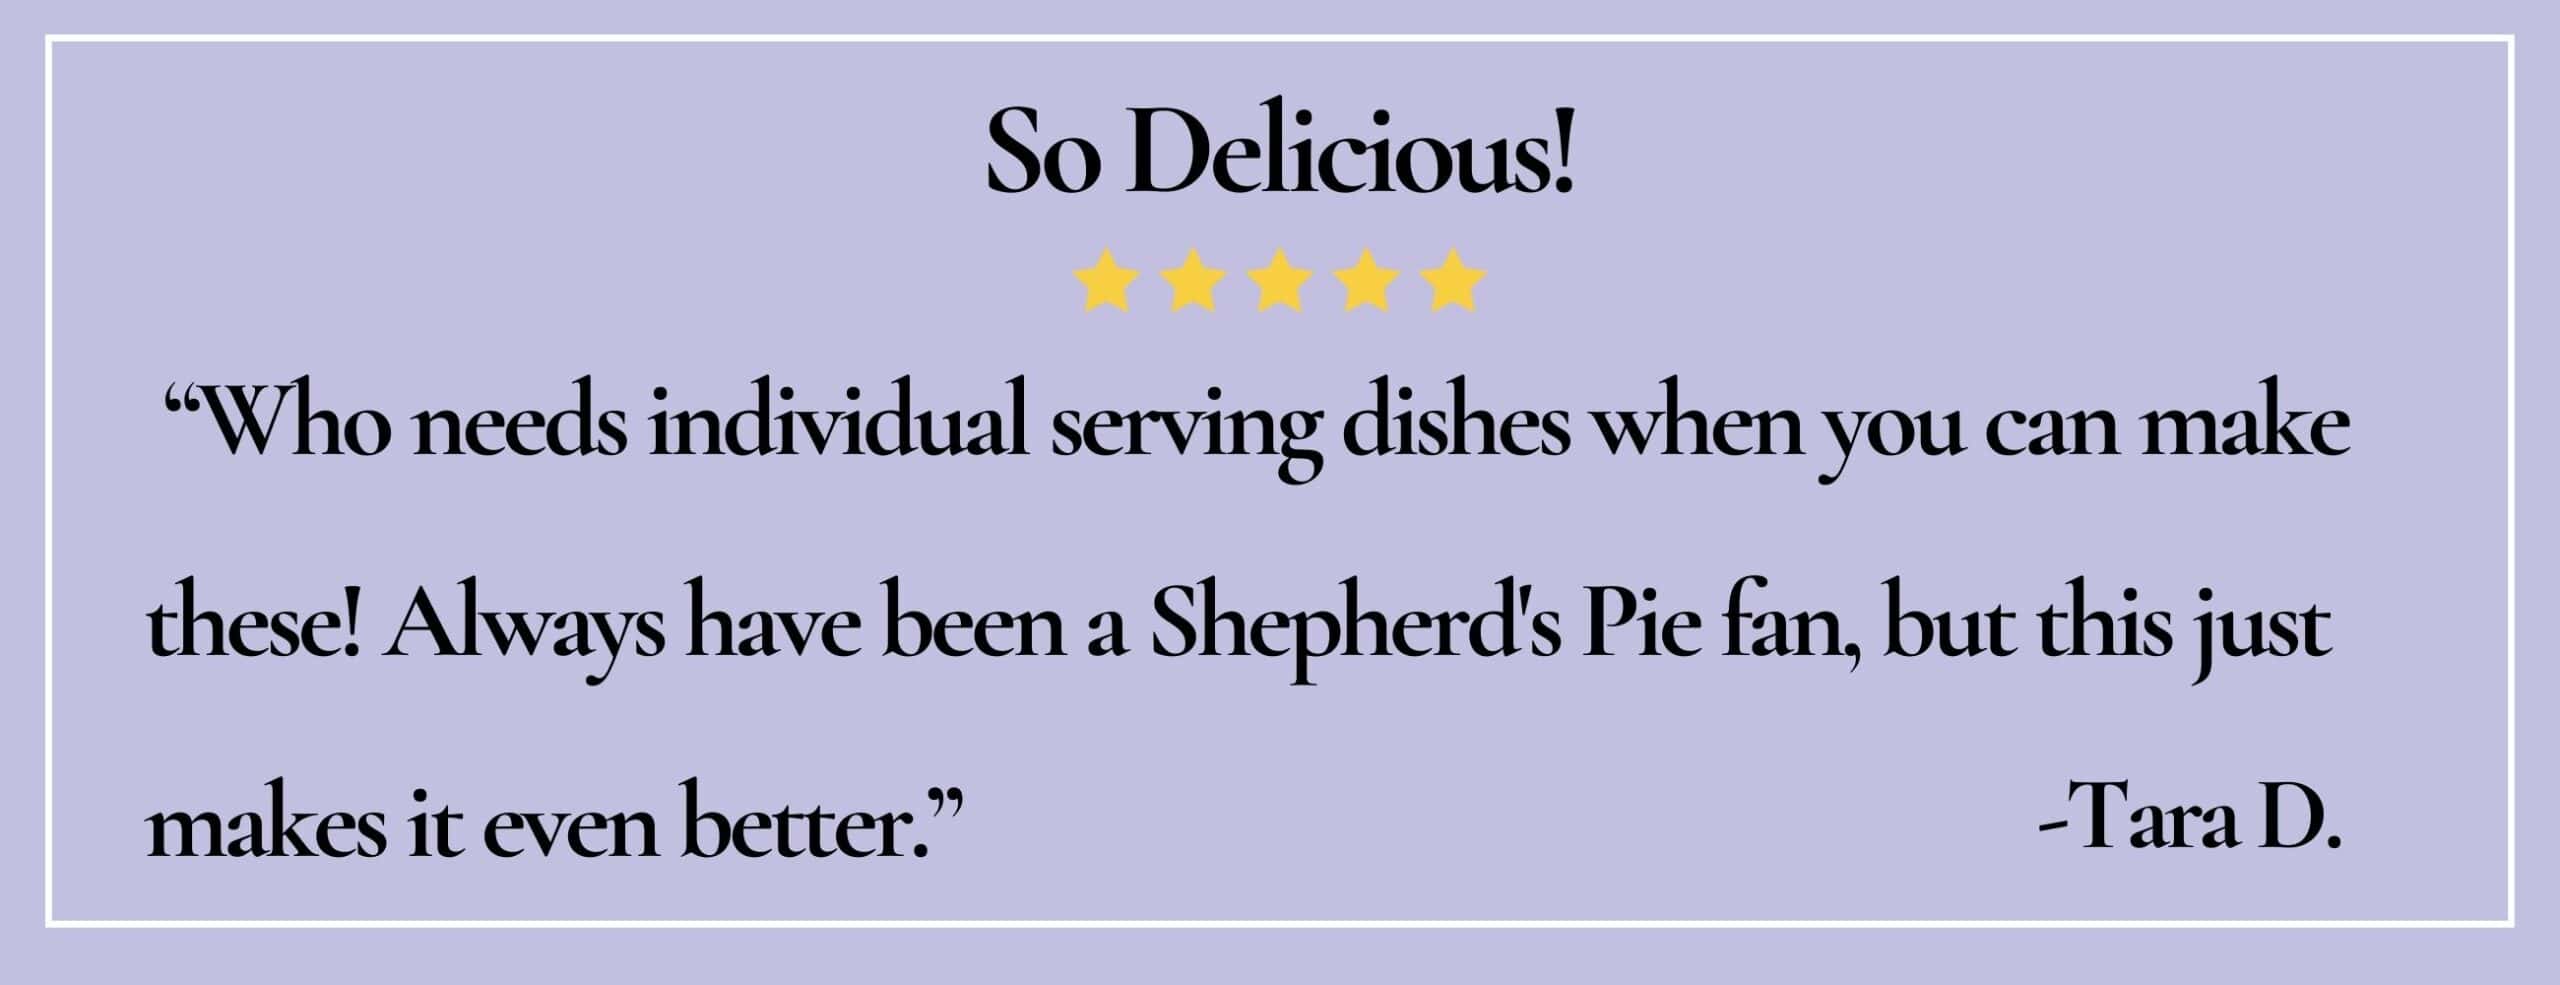 text box with paraphrase: Always have been a Shepherd's Pie fan, but this just makes it even better. - Tara D.